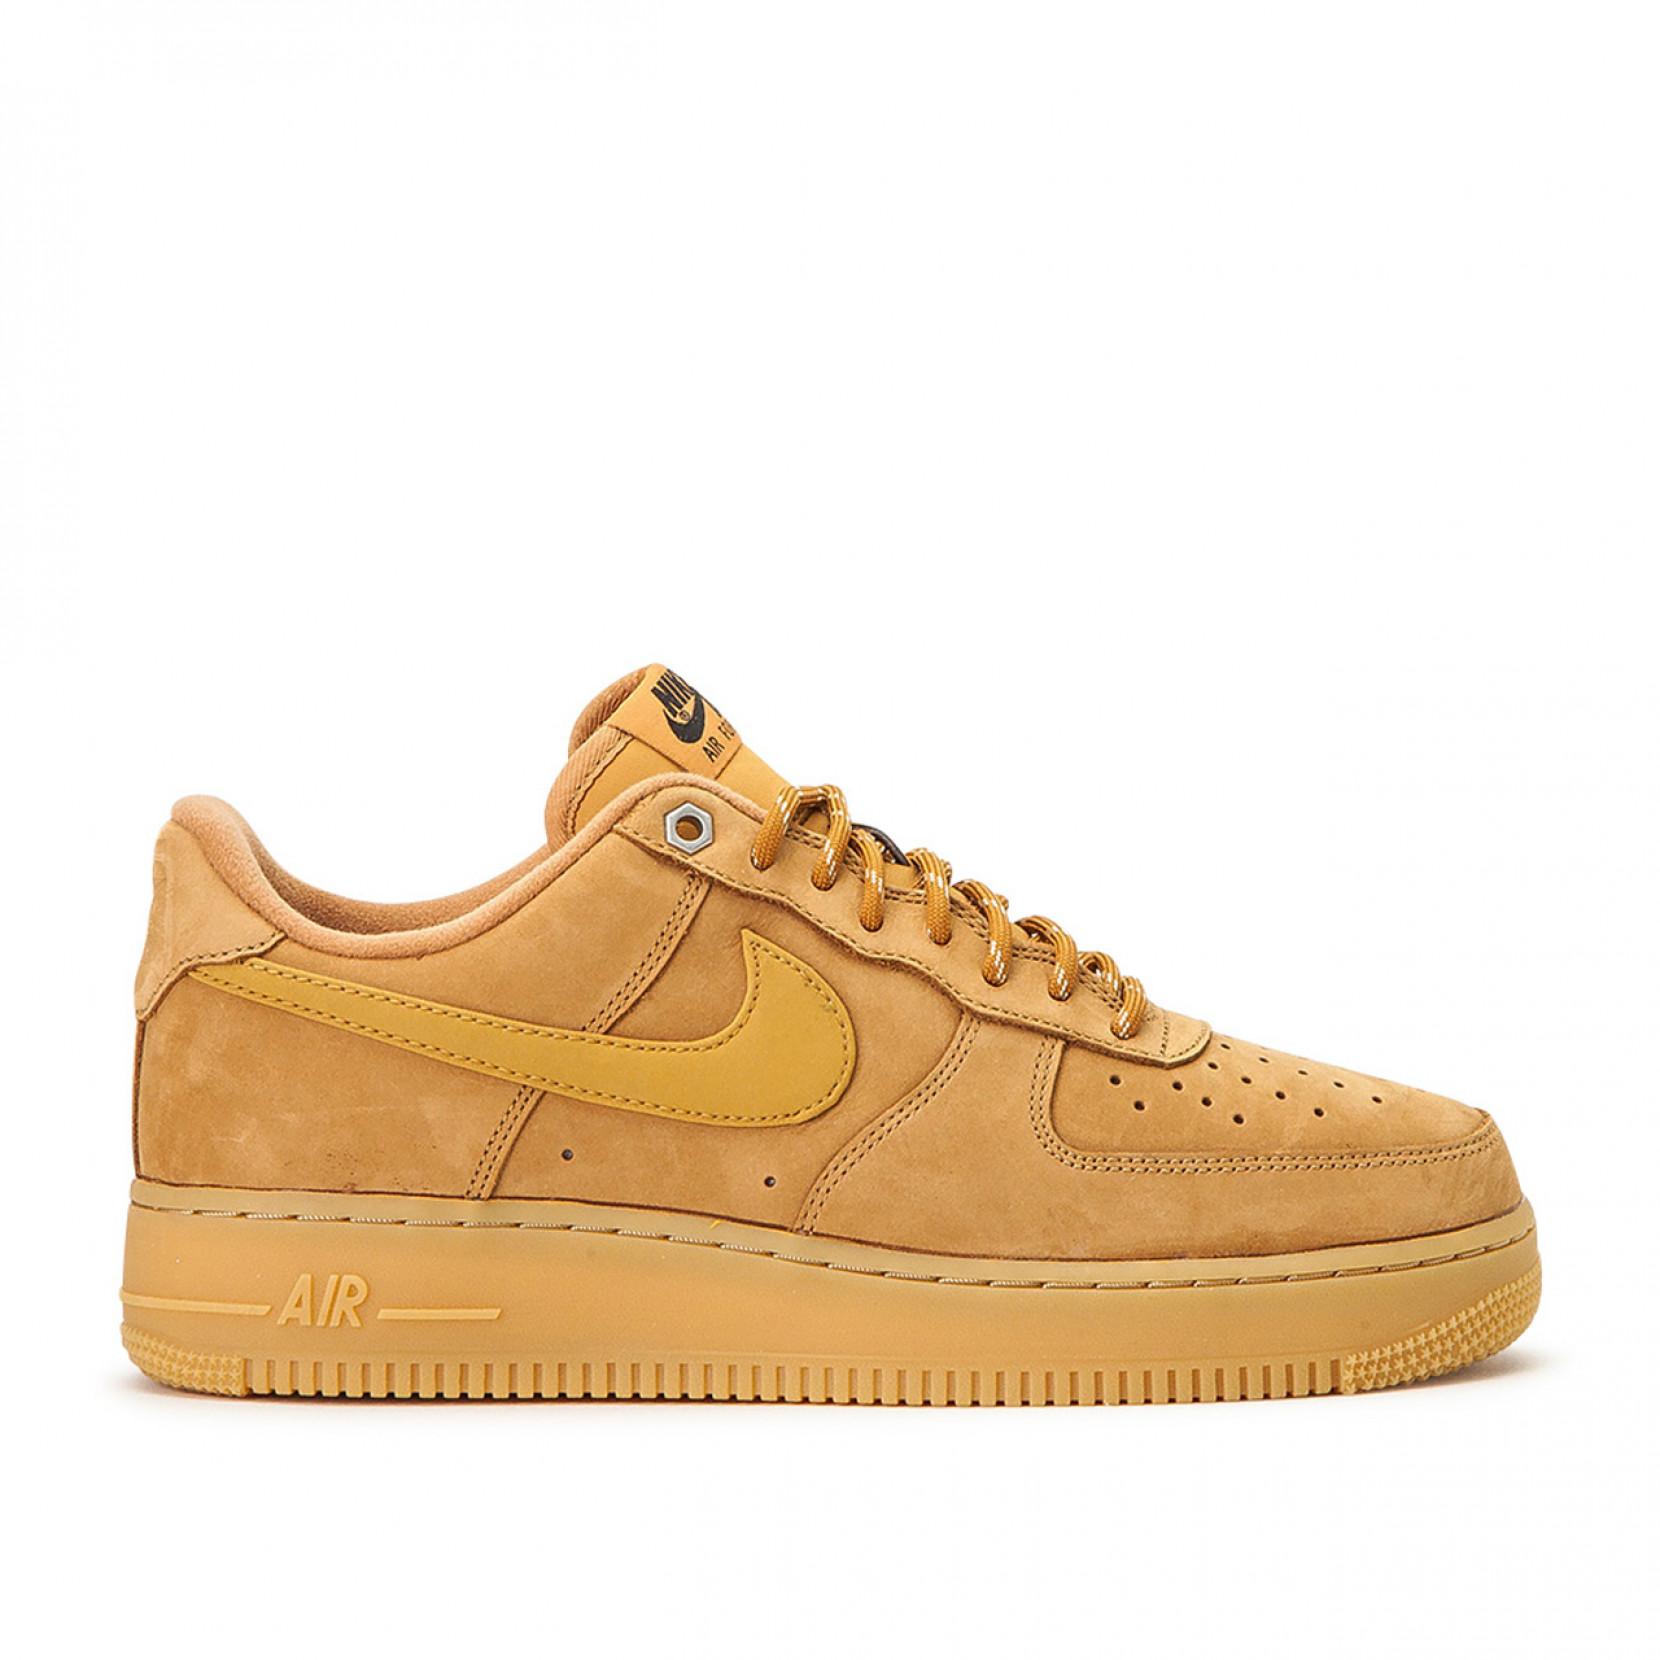 Nike Air Force 1 '07 Lv8 in Beige (Brown) for Men - Save 32% - Lyst